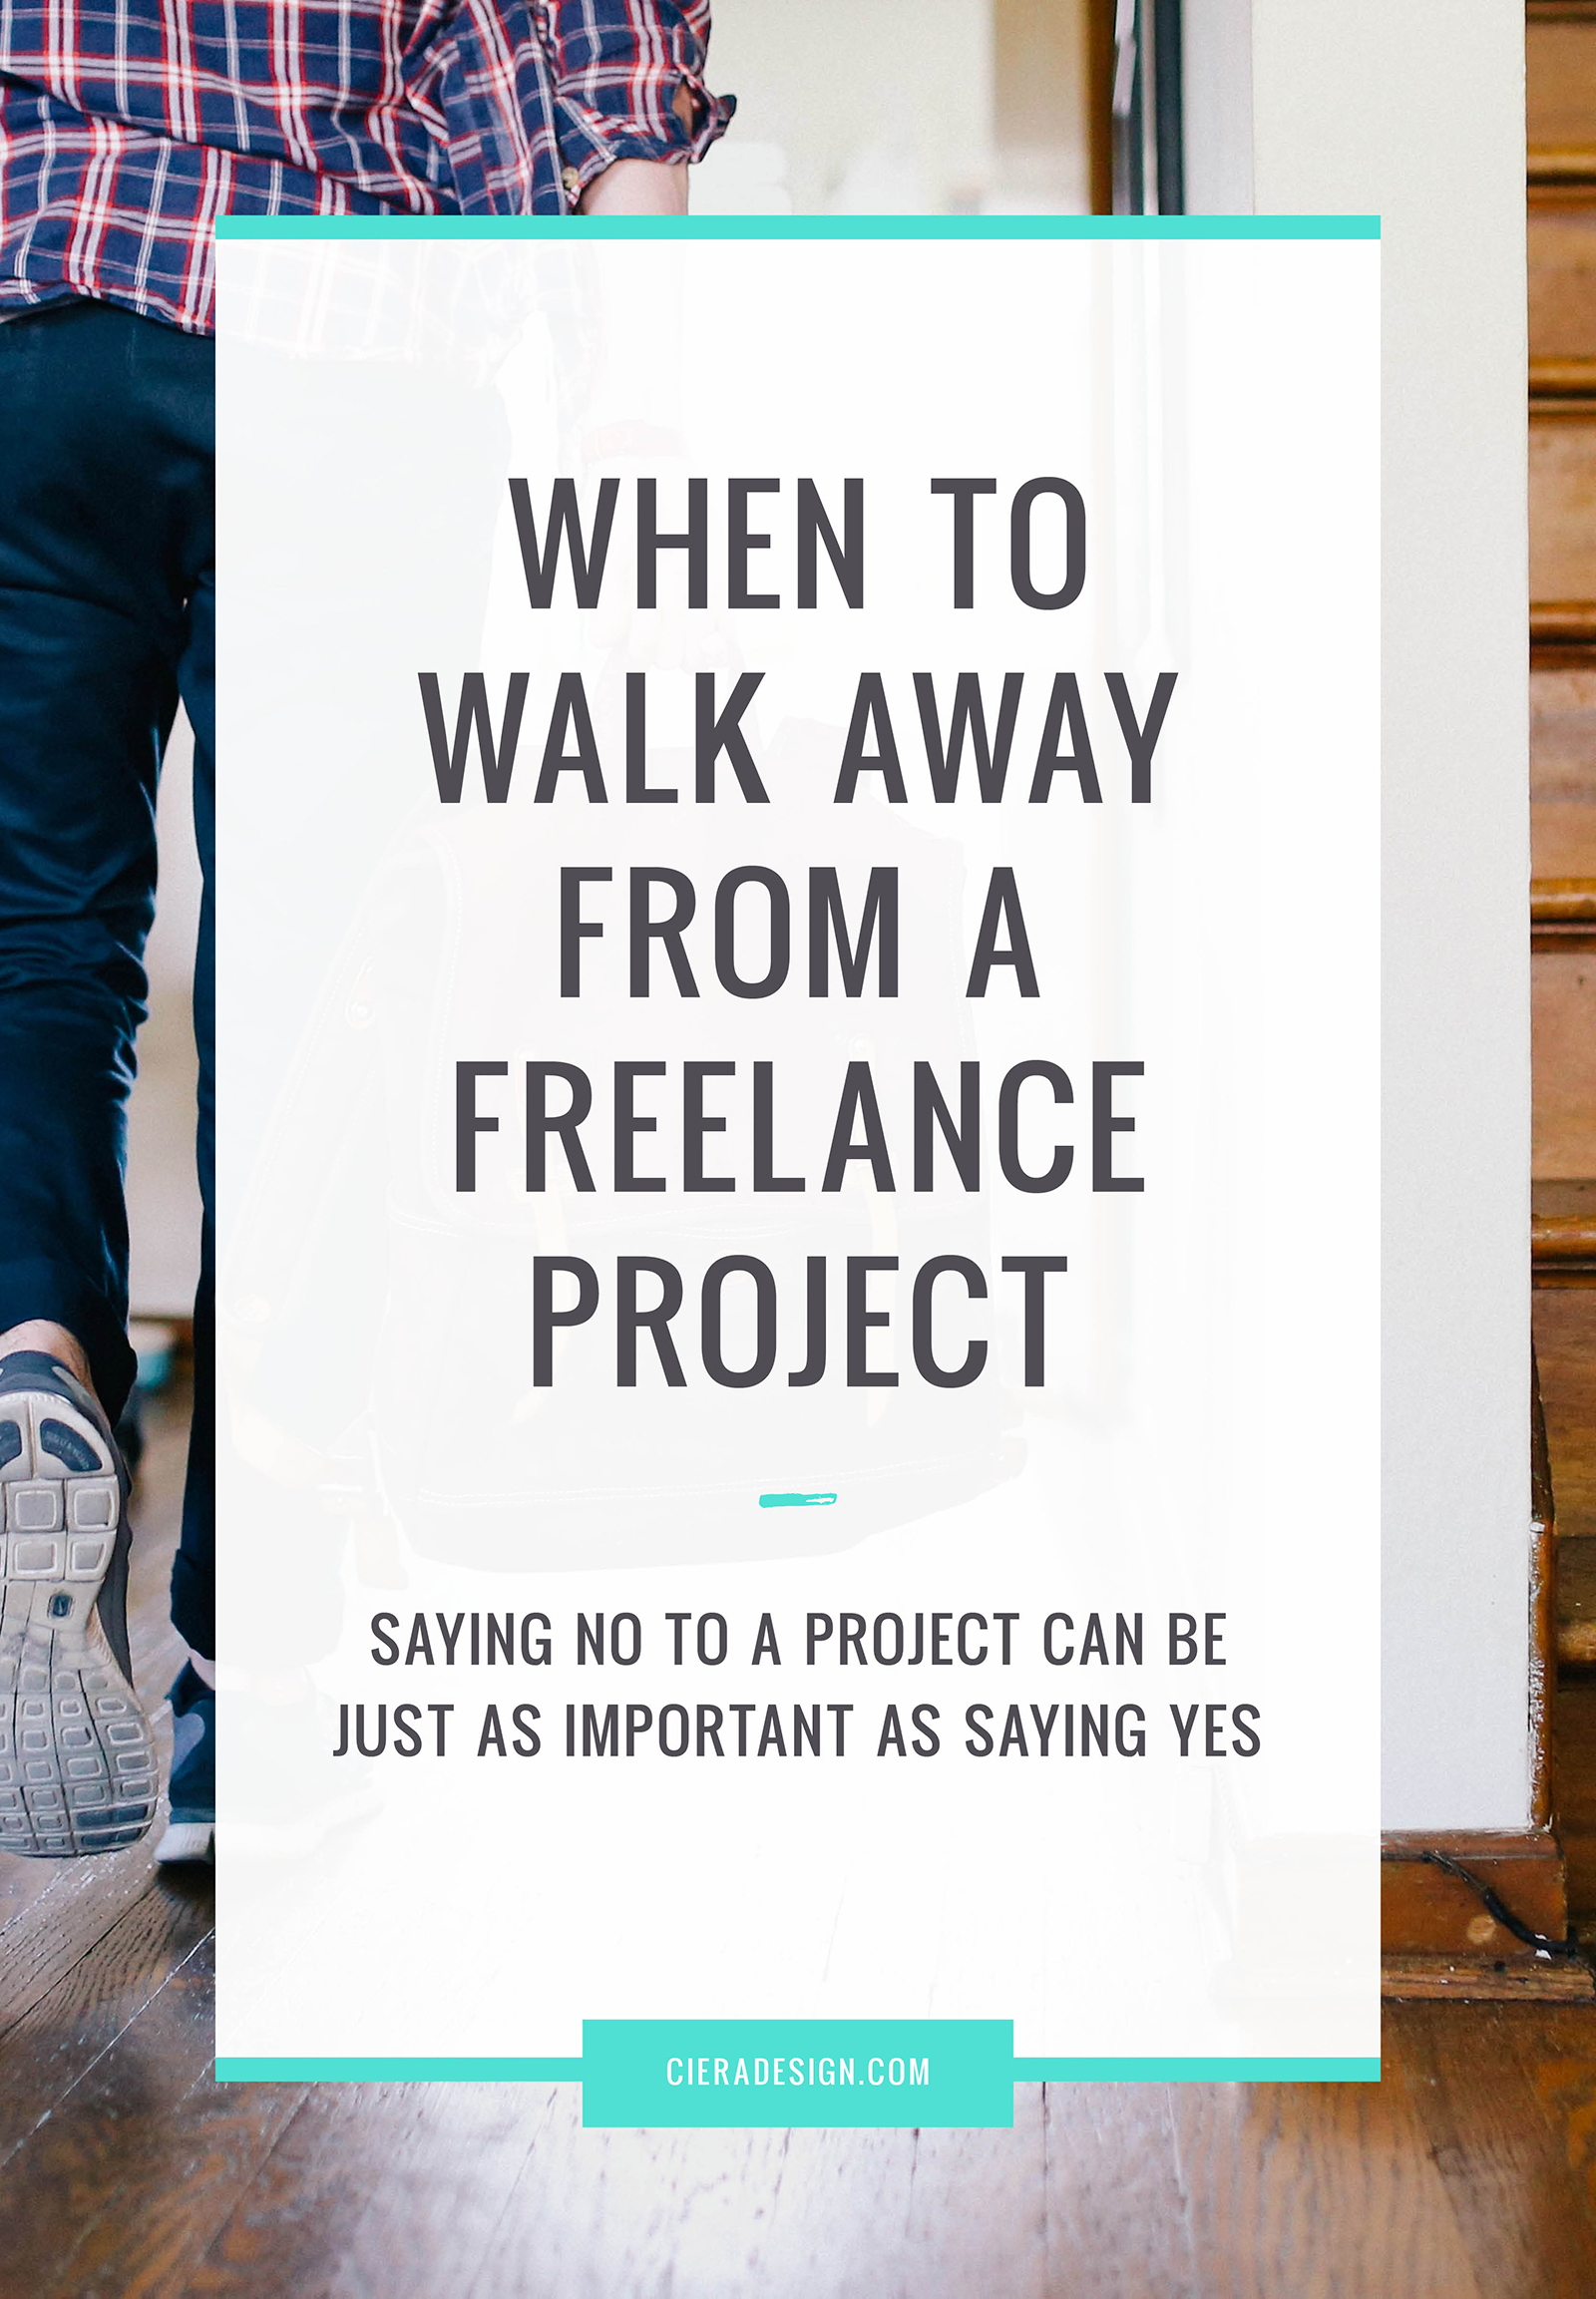 When To Walk Away From A Freelance Project - saying no to a project can be just as important as saying yes.